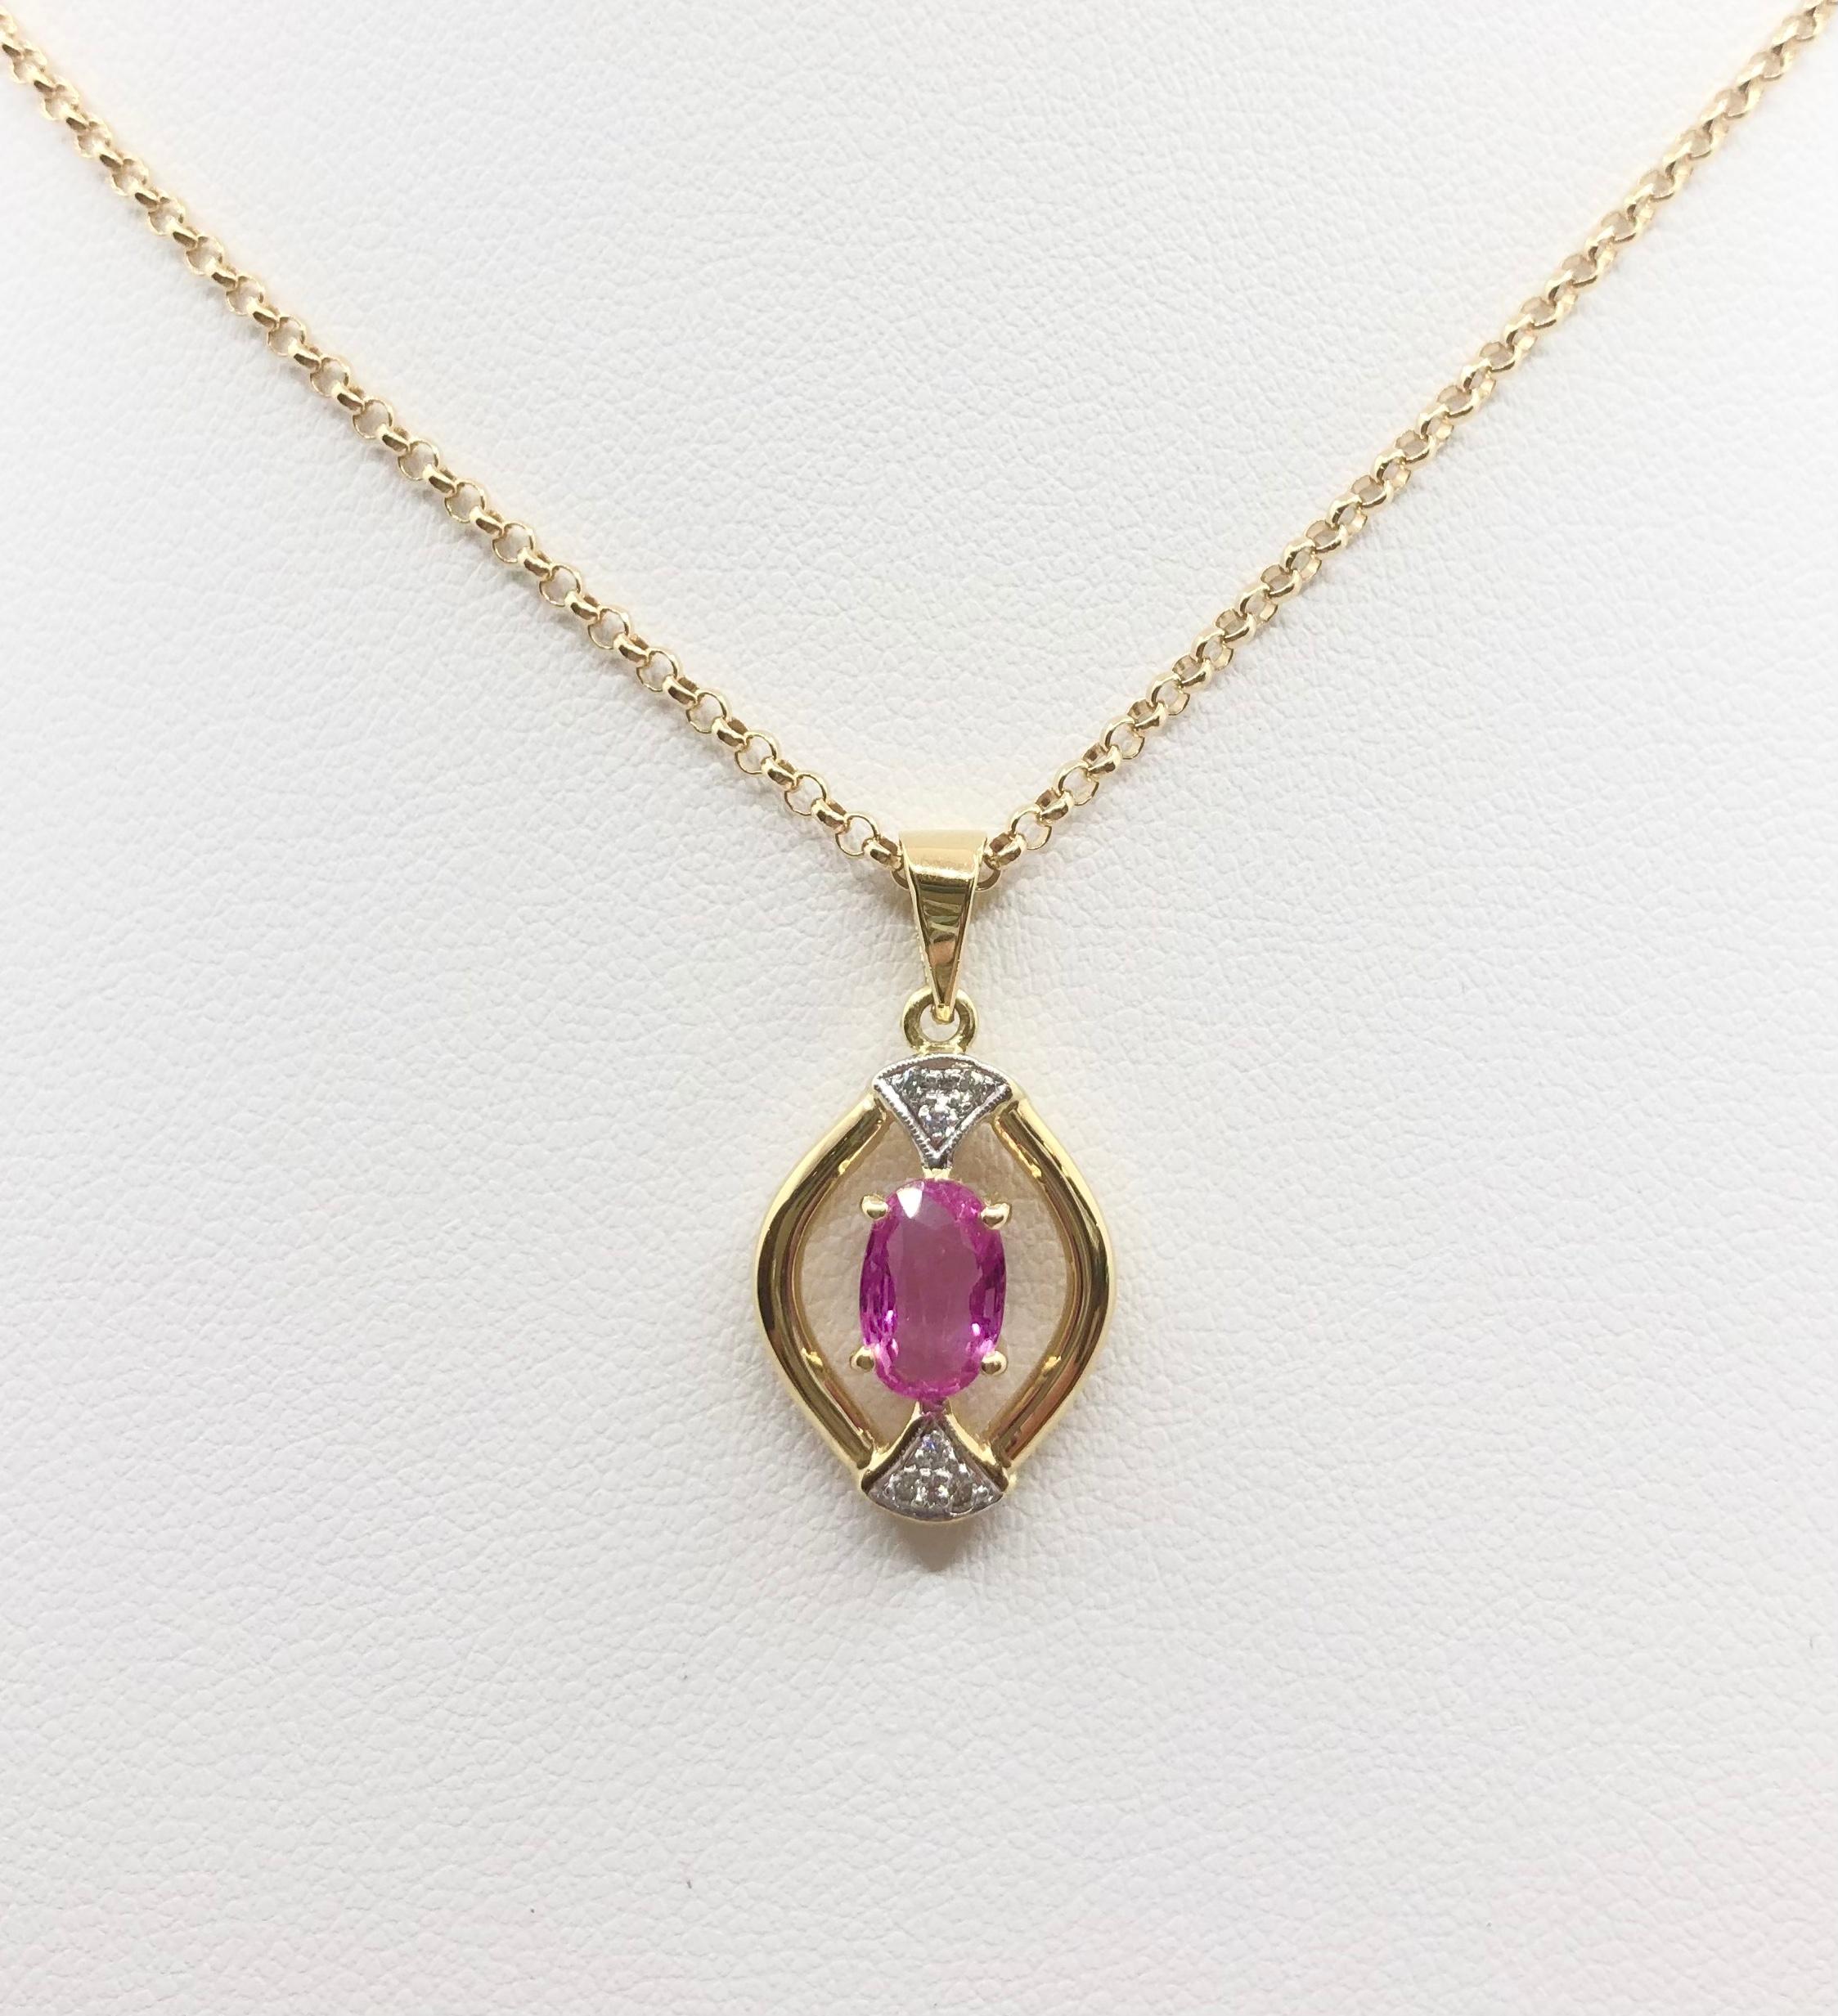 Pink Sapphire 0.99 carat with Diamond 0.06 carat Pendant set in 18 Karat Gold Settings
(chain not included)

Width: 1.3 cm 
Length: 2.4 cm
Total Weight: 2.83 grams

